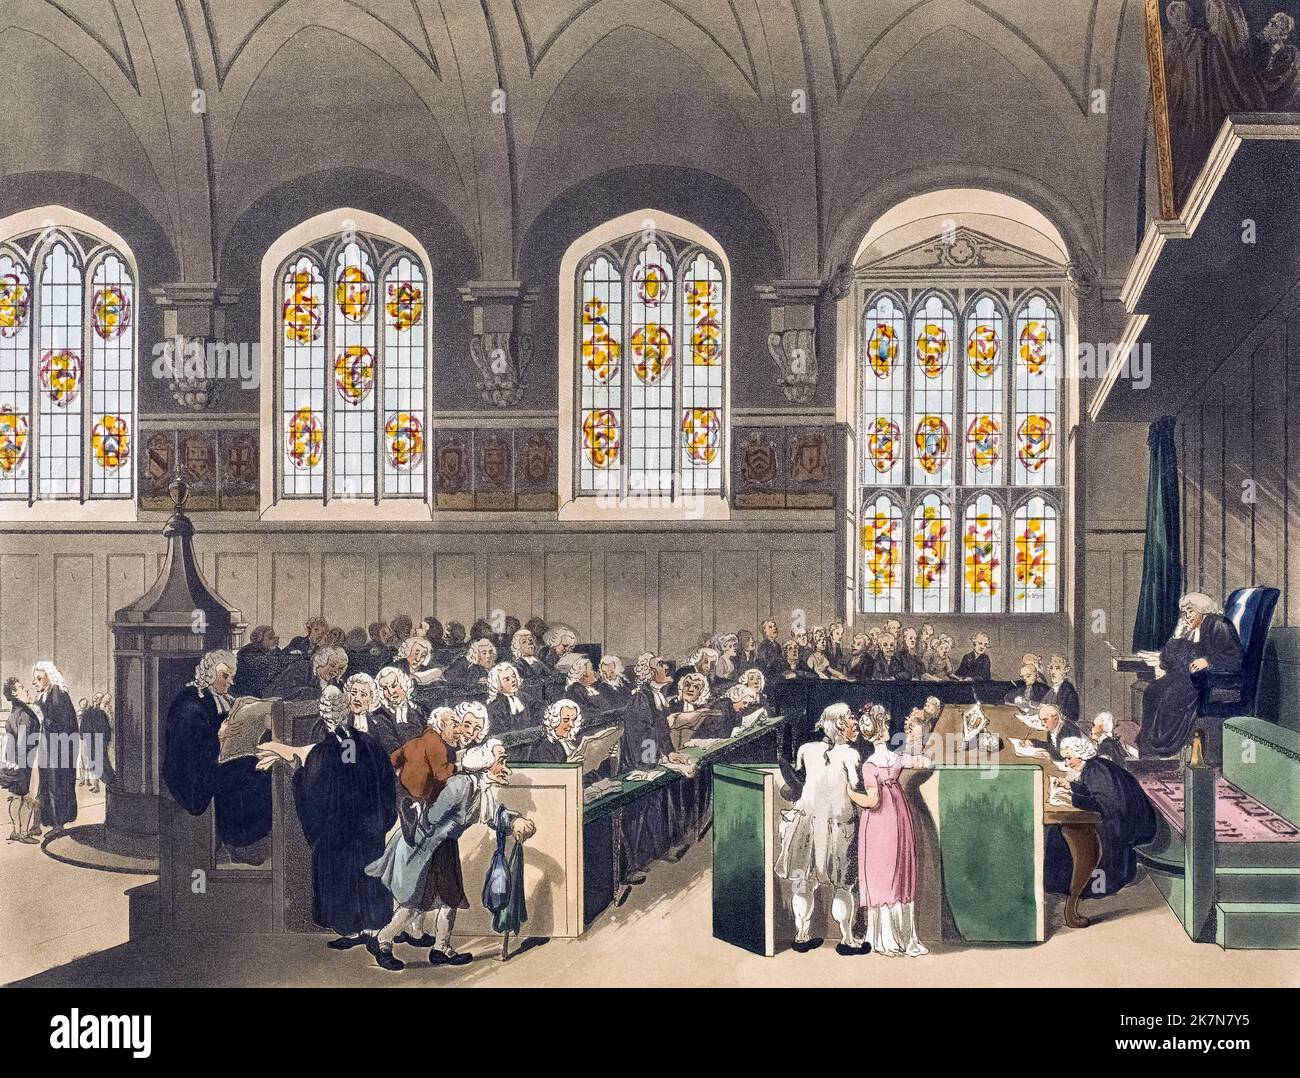 Court of Chancery, Lincoln's Inn Hall.  Circa 1808.  After a work by August Pugin and Thomas Rowlandson in the Microcosm of London, published in three volumes between 1808 and 1810 by Rudolph Ackermann.   Pugin was the artist responsible for the architectural elements in the Microcosm pictures; Thomas Rowlandson was hired to add the lively human figures. Stock Photo